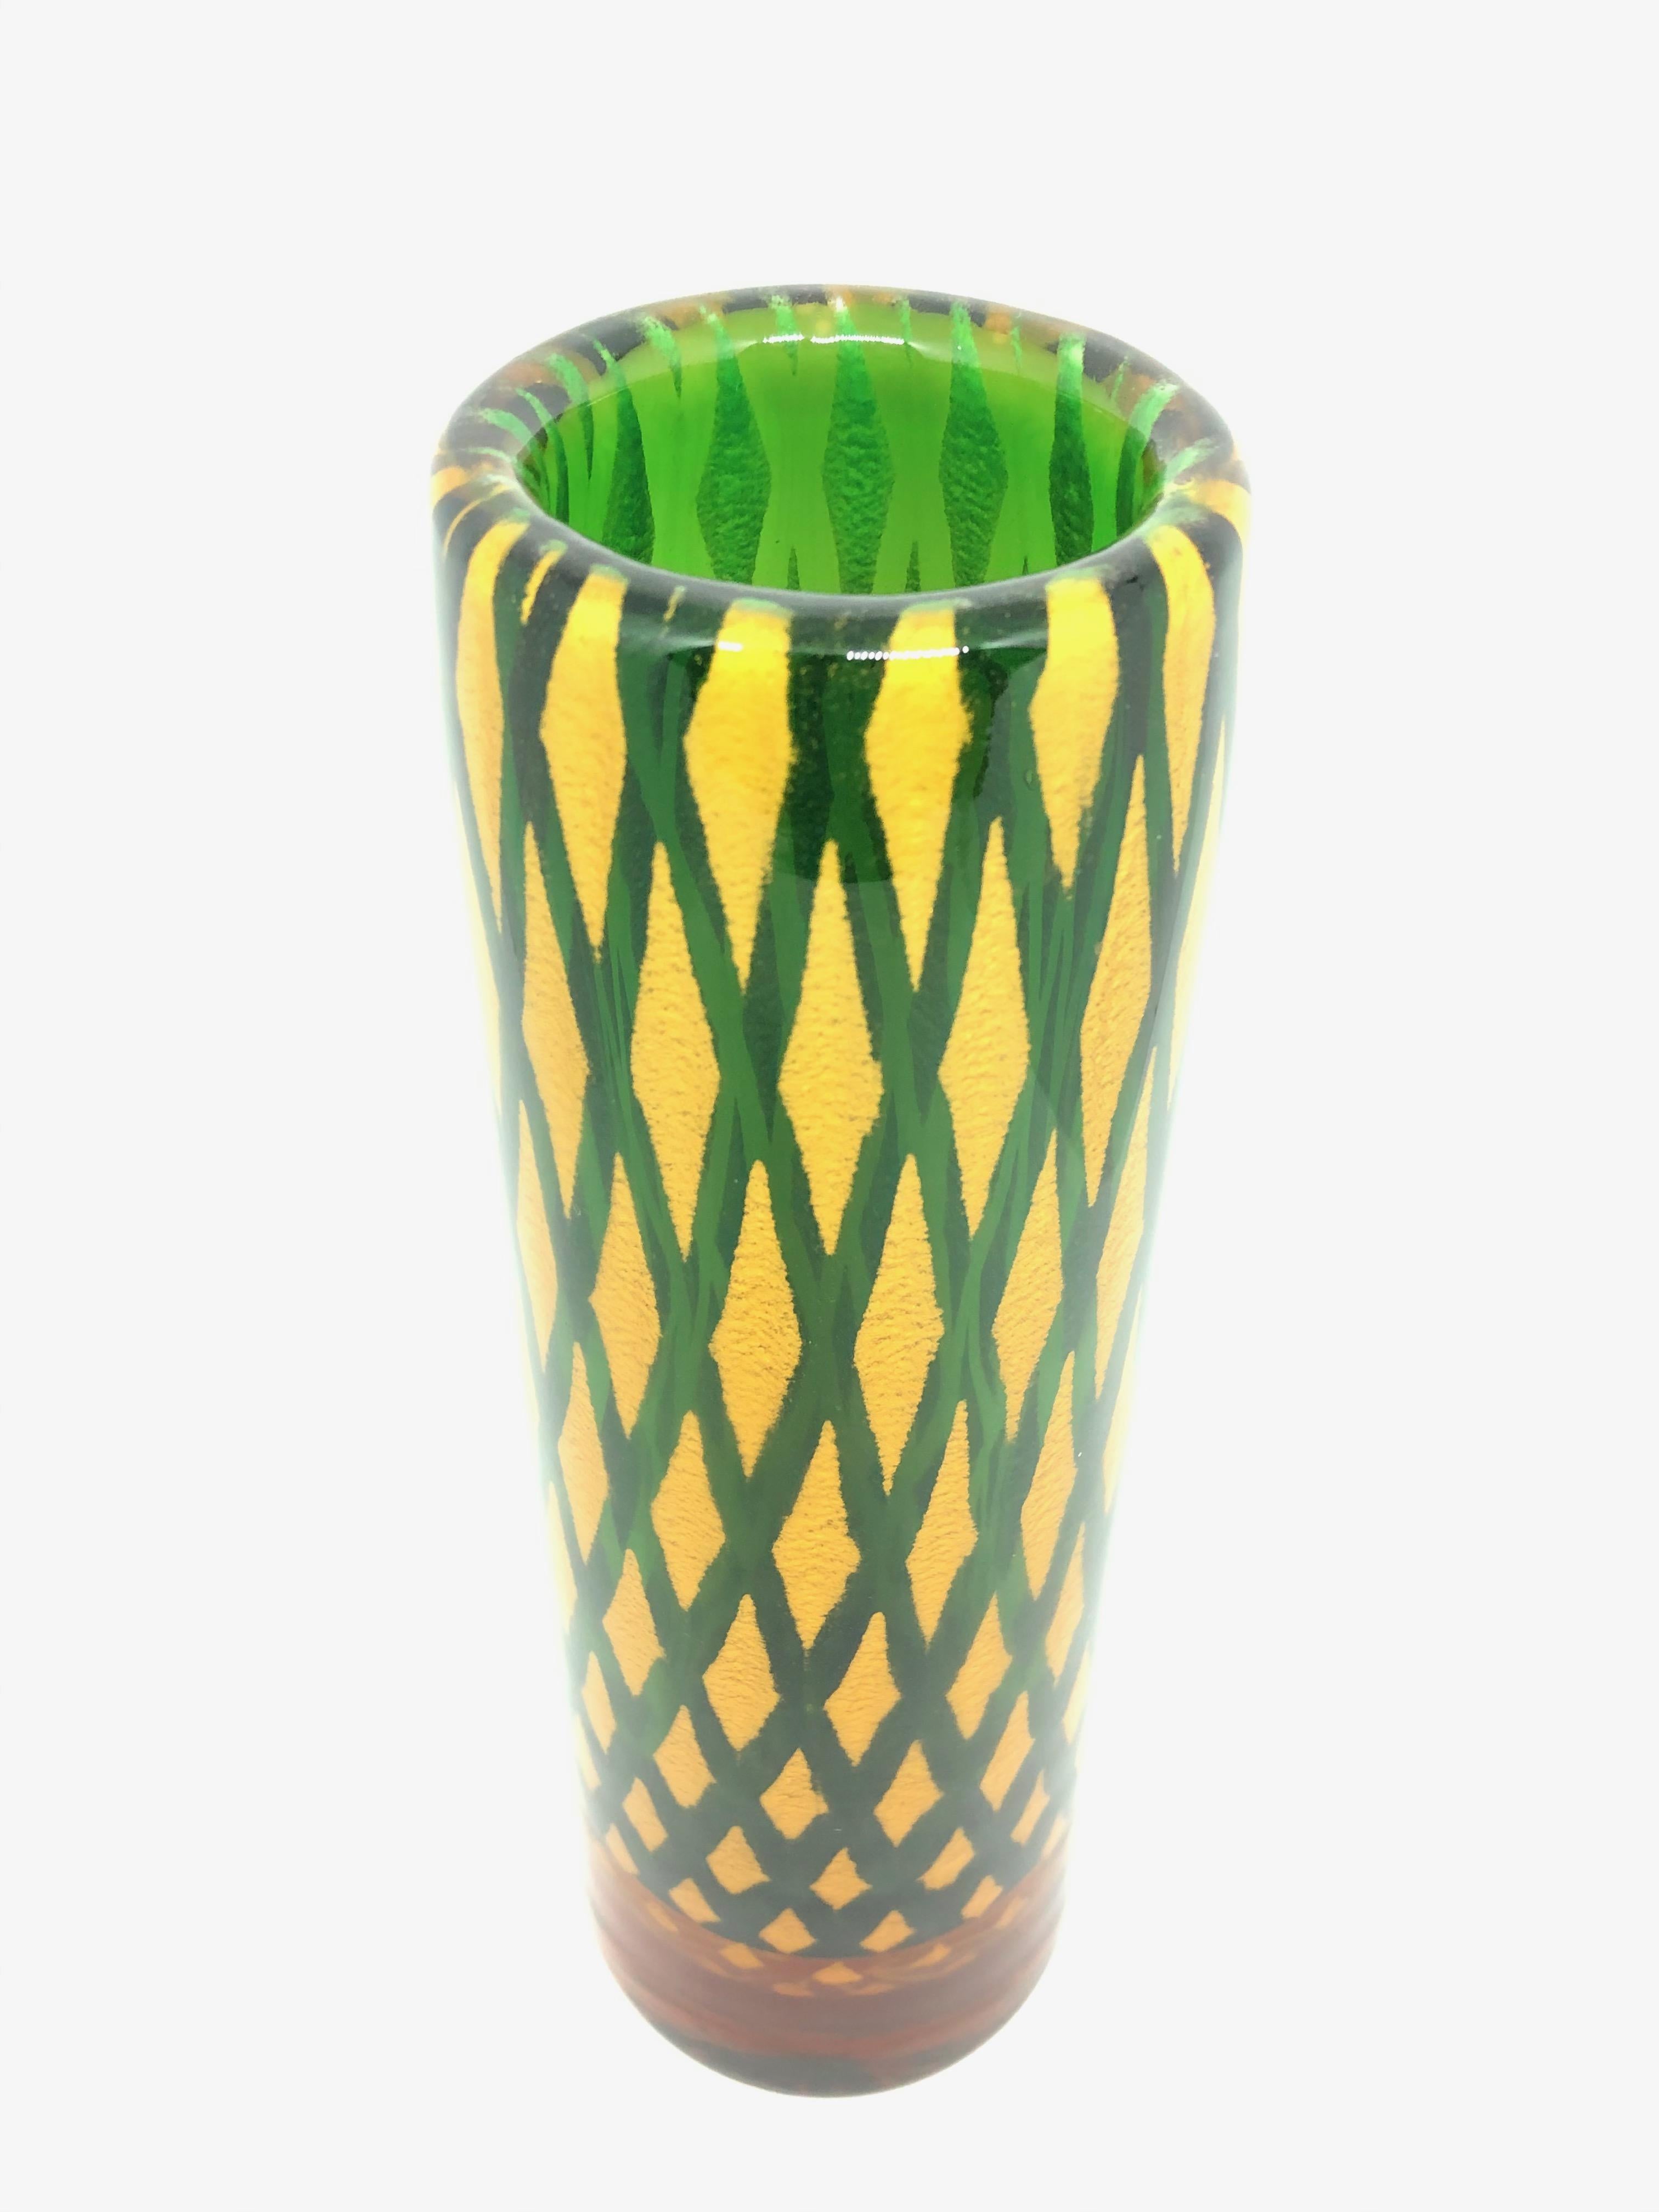 Hand-Crafted Vintage Heavy Murano Galliano Ferro Style Art Glass Cylinder Vase, Italy, 1970s For Sale